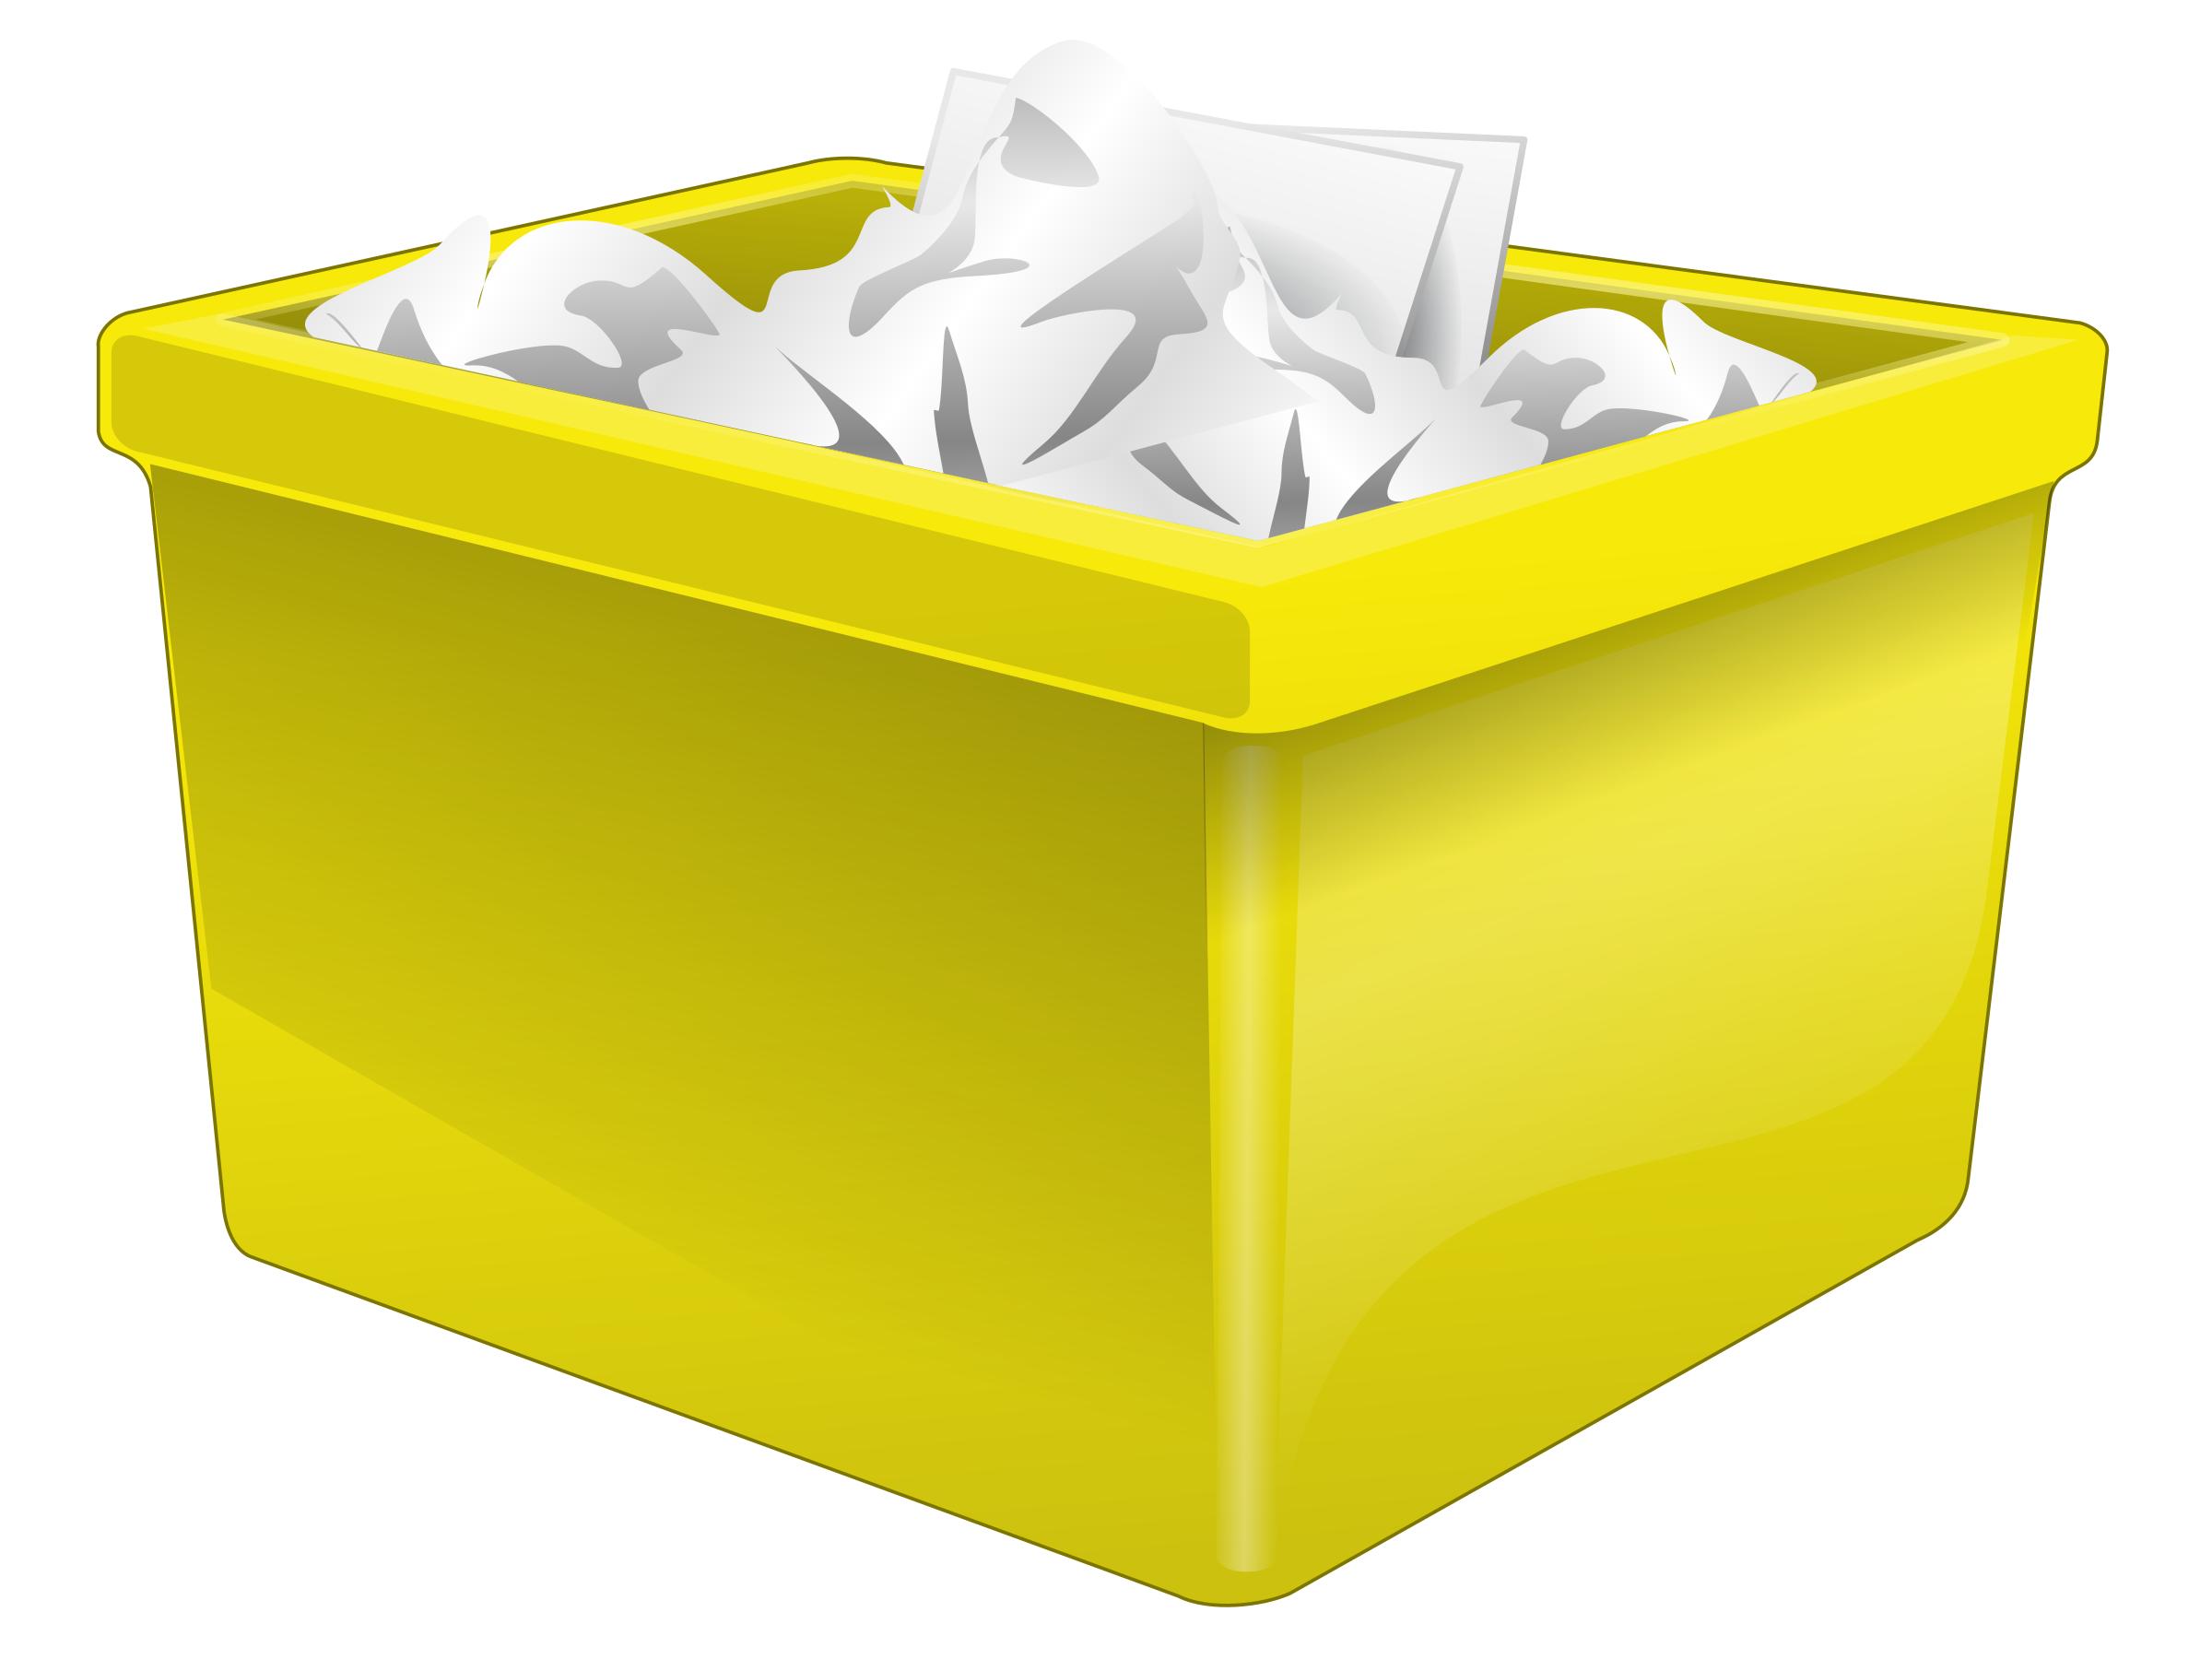 Yellow Plastic Box Filled With Paper icons